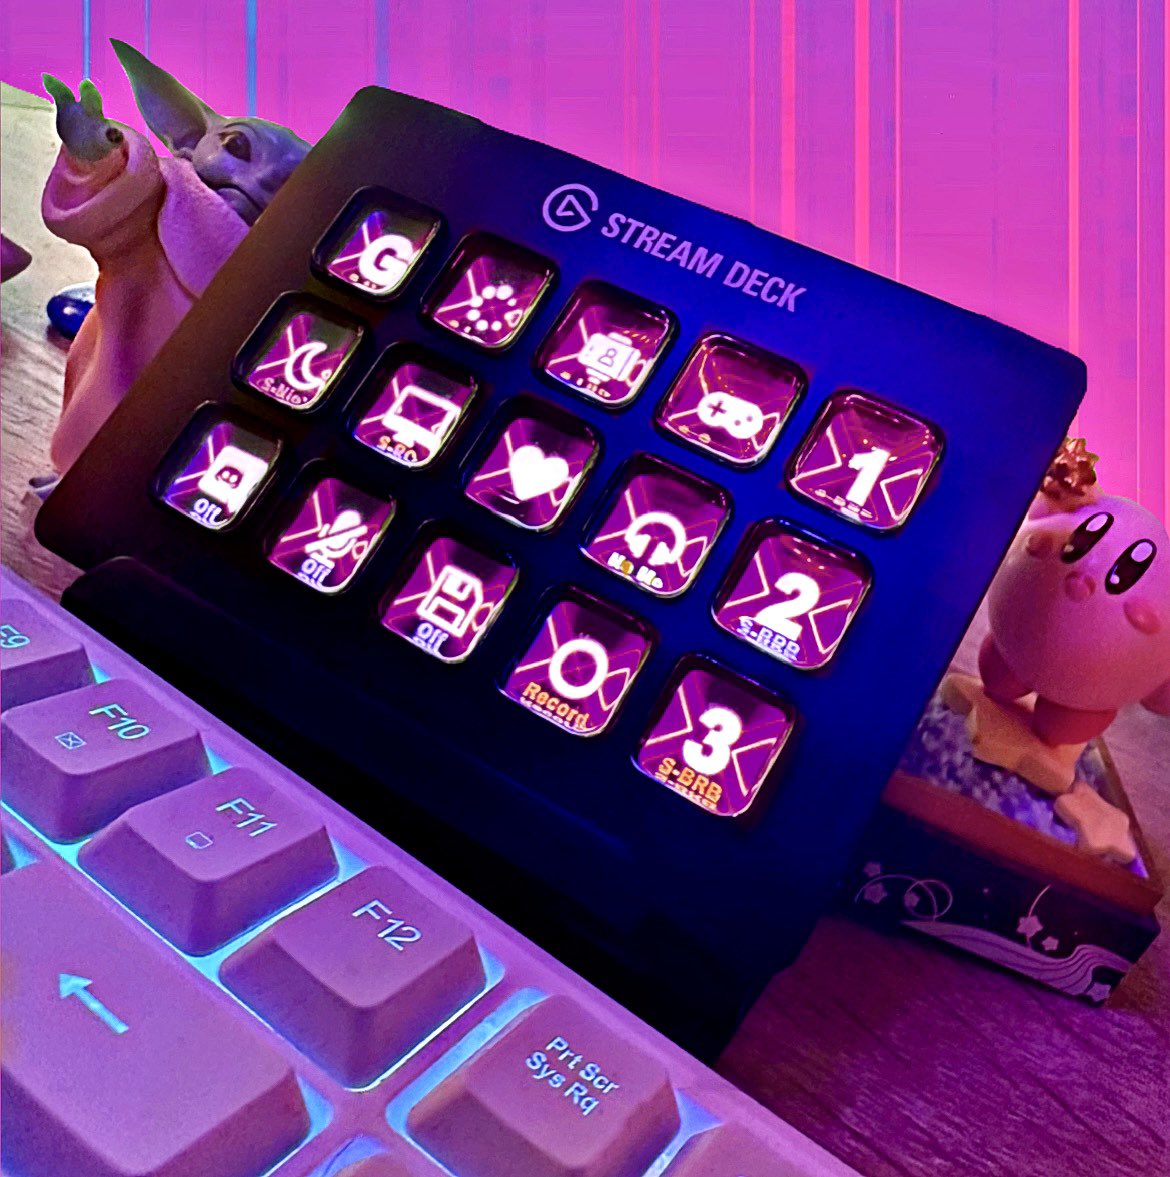 Got this baby all customized and setup, ready for tonight’s stream!! Can’t wait to test it out 💗Come say Hi! 😉 9:30 CST 
#streamdeck #elgato #setup #streamlabs #streamer #elgatogaming #twitch #gamer #gamergirl #twitchaffiliate #livestream #nerdygirl #pink #findme